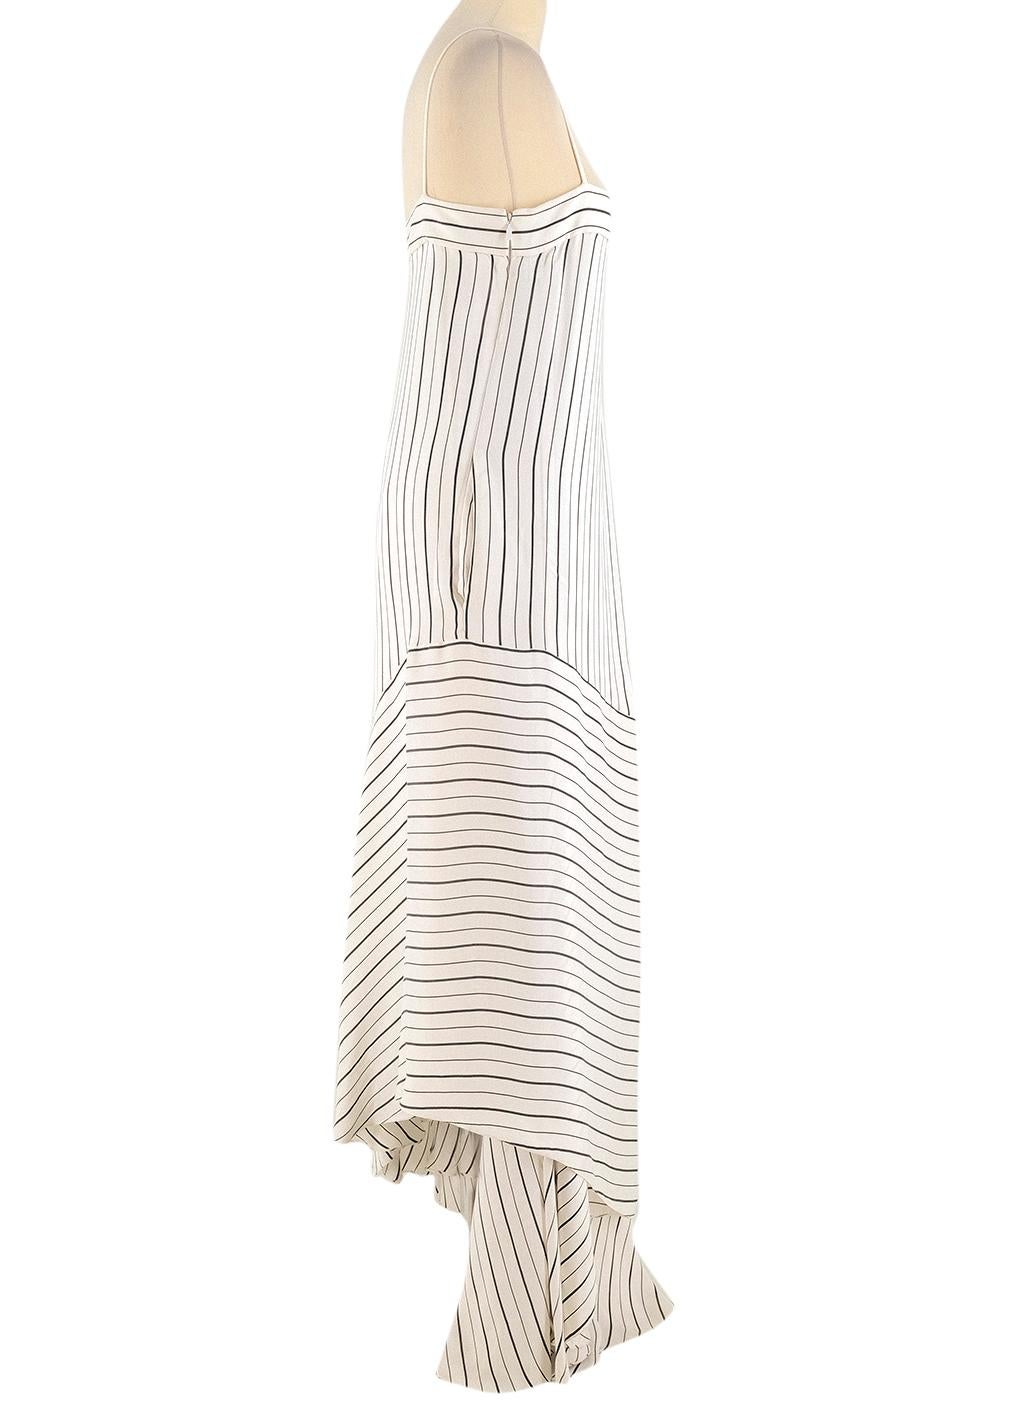 Chloe Striped Asymmetric-Hem Maxi Dress 

- White and black striped, mid-weight maxi dress
- Asymmetrical and flared skirt
- Skinny shoulder straps
- Square neckline
- Side-zip and hook-and-eye fastening
- Right side slanted pocket
- 90% viscose and